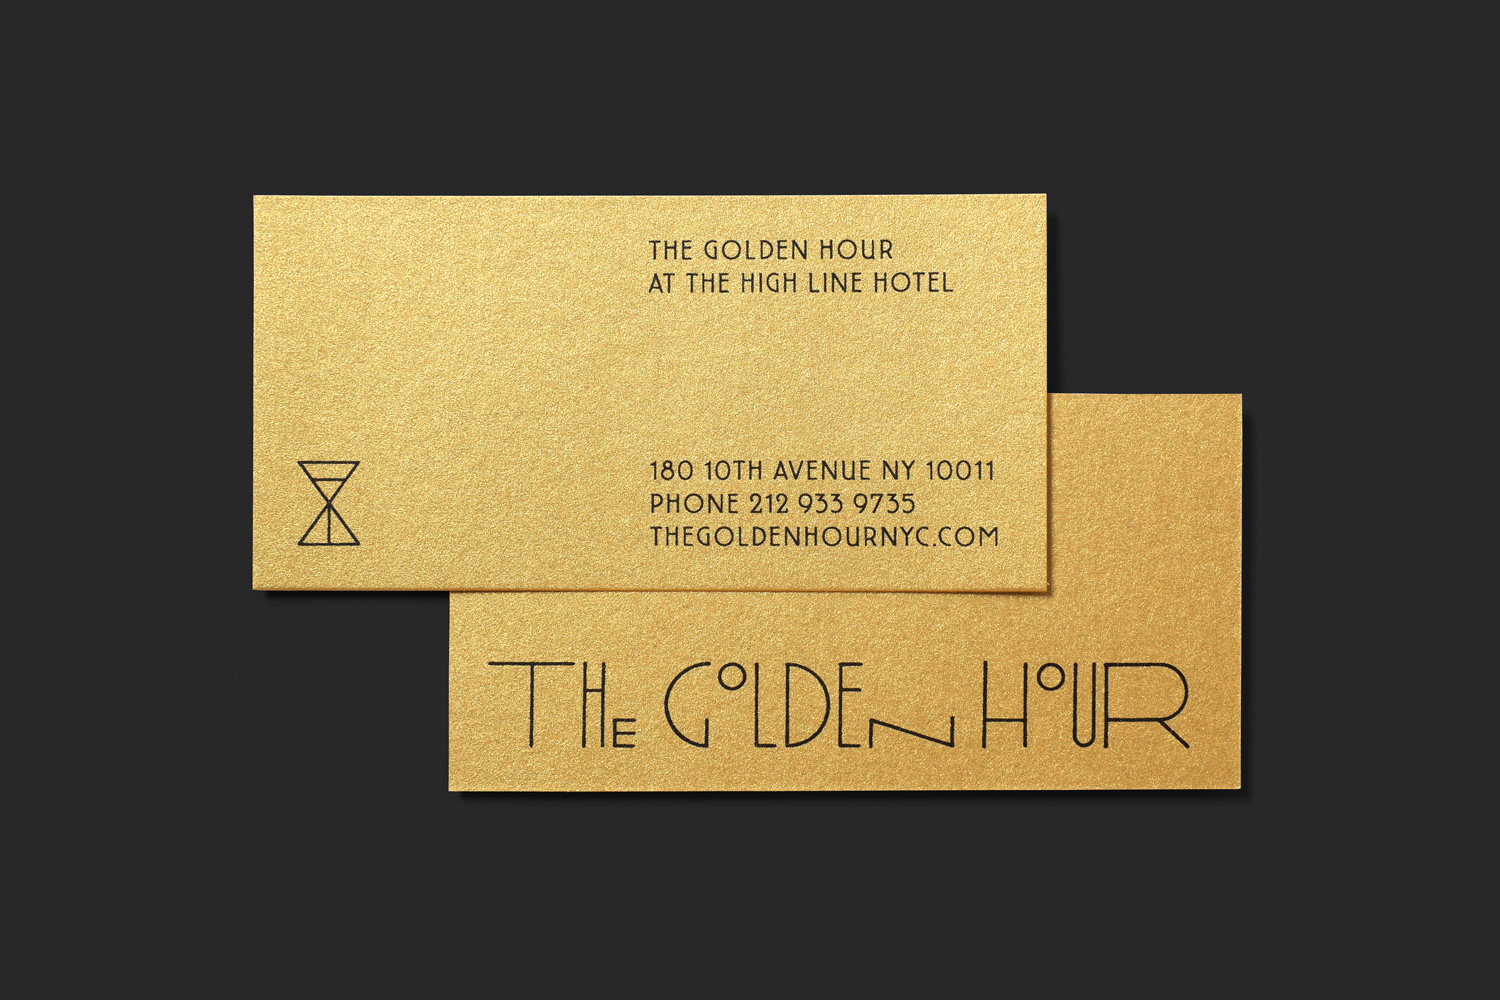 New Graphic Identity and business card design for New York restaurant The Golden Hour by Triboro